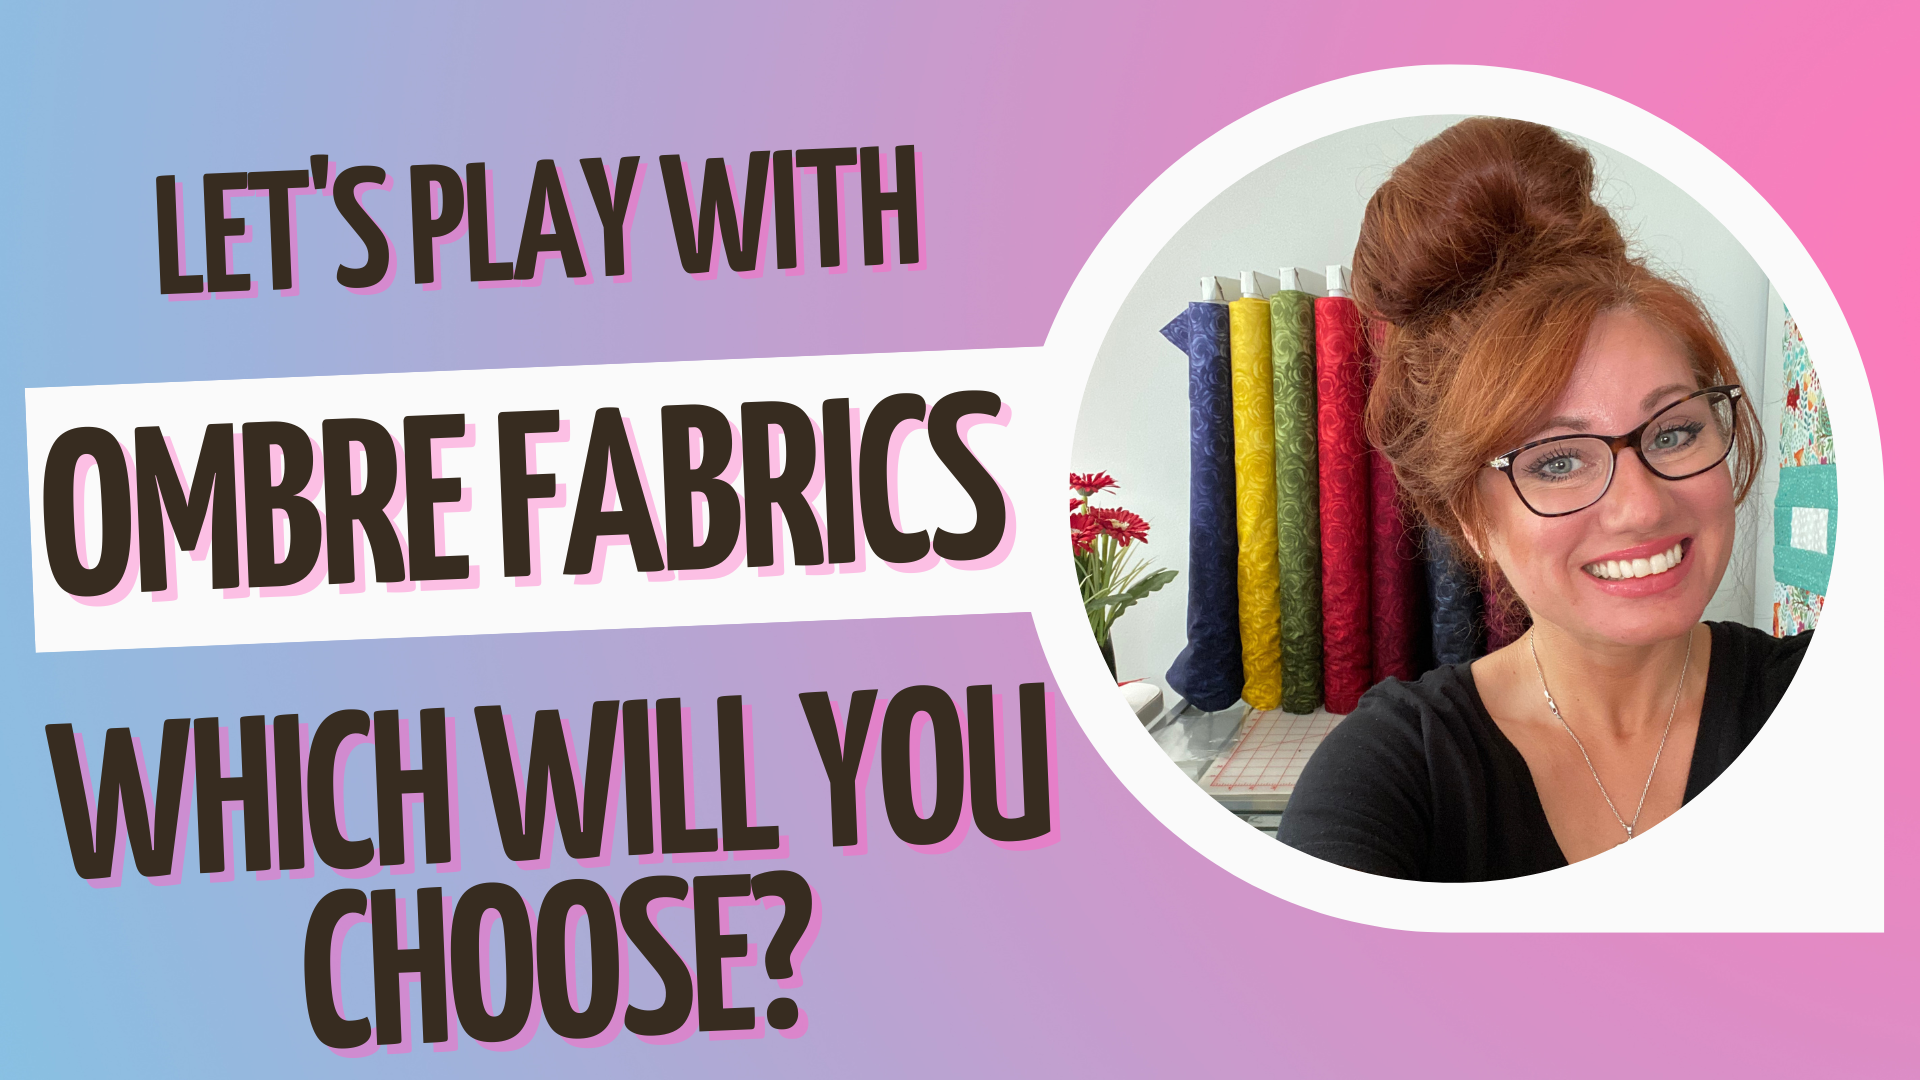 Let's play with Ombre Fabrics!